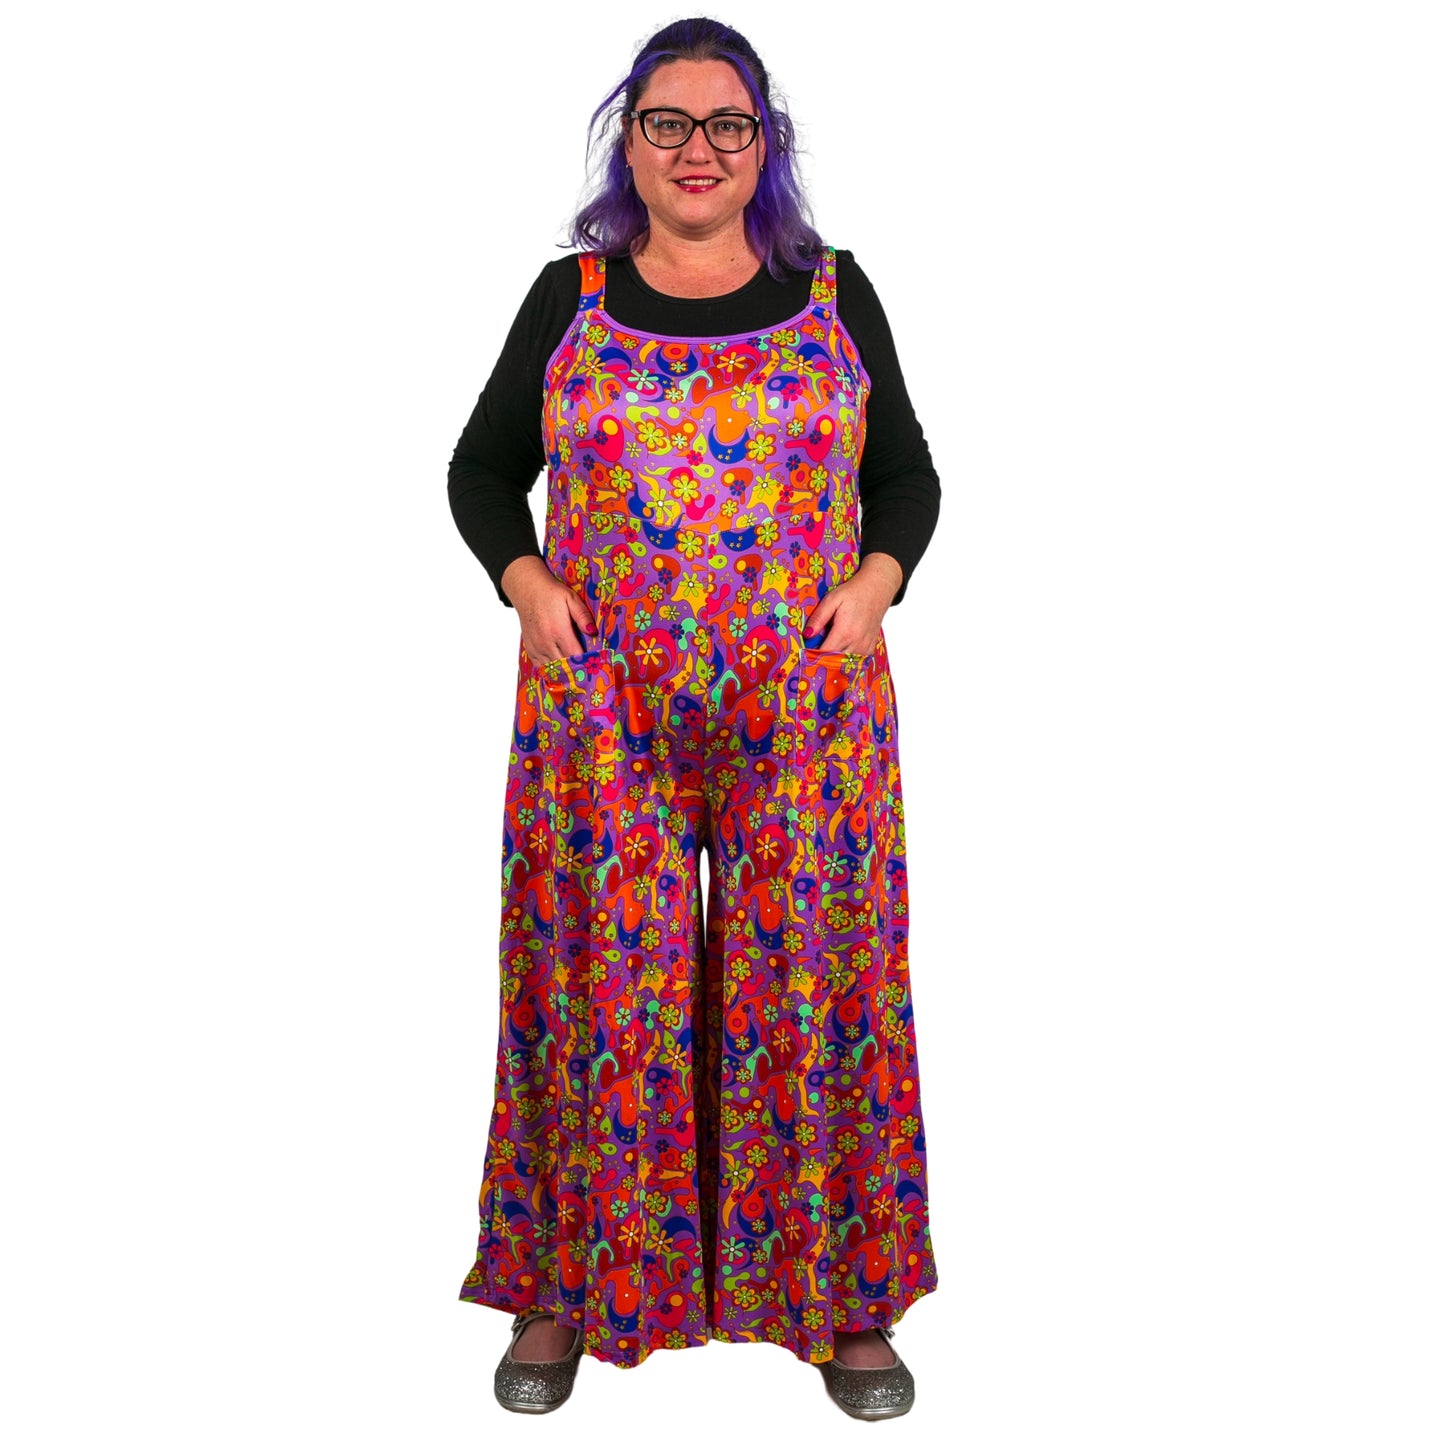 Flower Power Jumpsuit by RainbowsAndFairies.com.au (Floral Print - Woodstock - Psychedelic - Overalls - Kitsch - Retro - Wide Leg Pants - Rockabilly) - SKU: CL_JUMPS_FLOPO_ORG - Pic-05